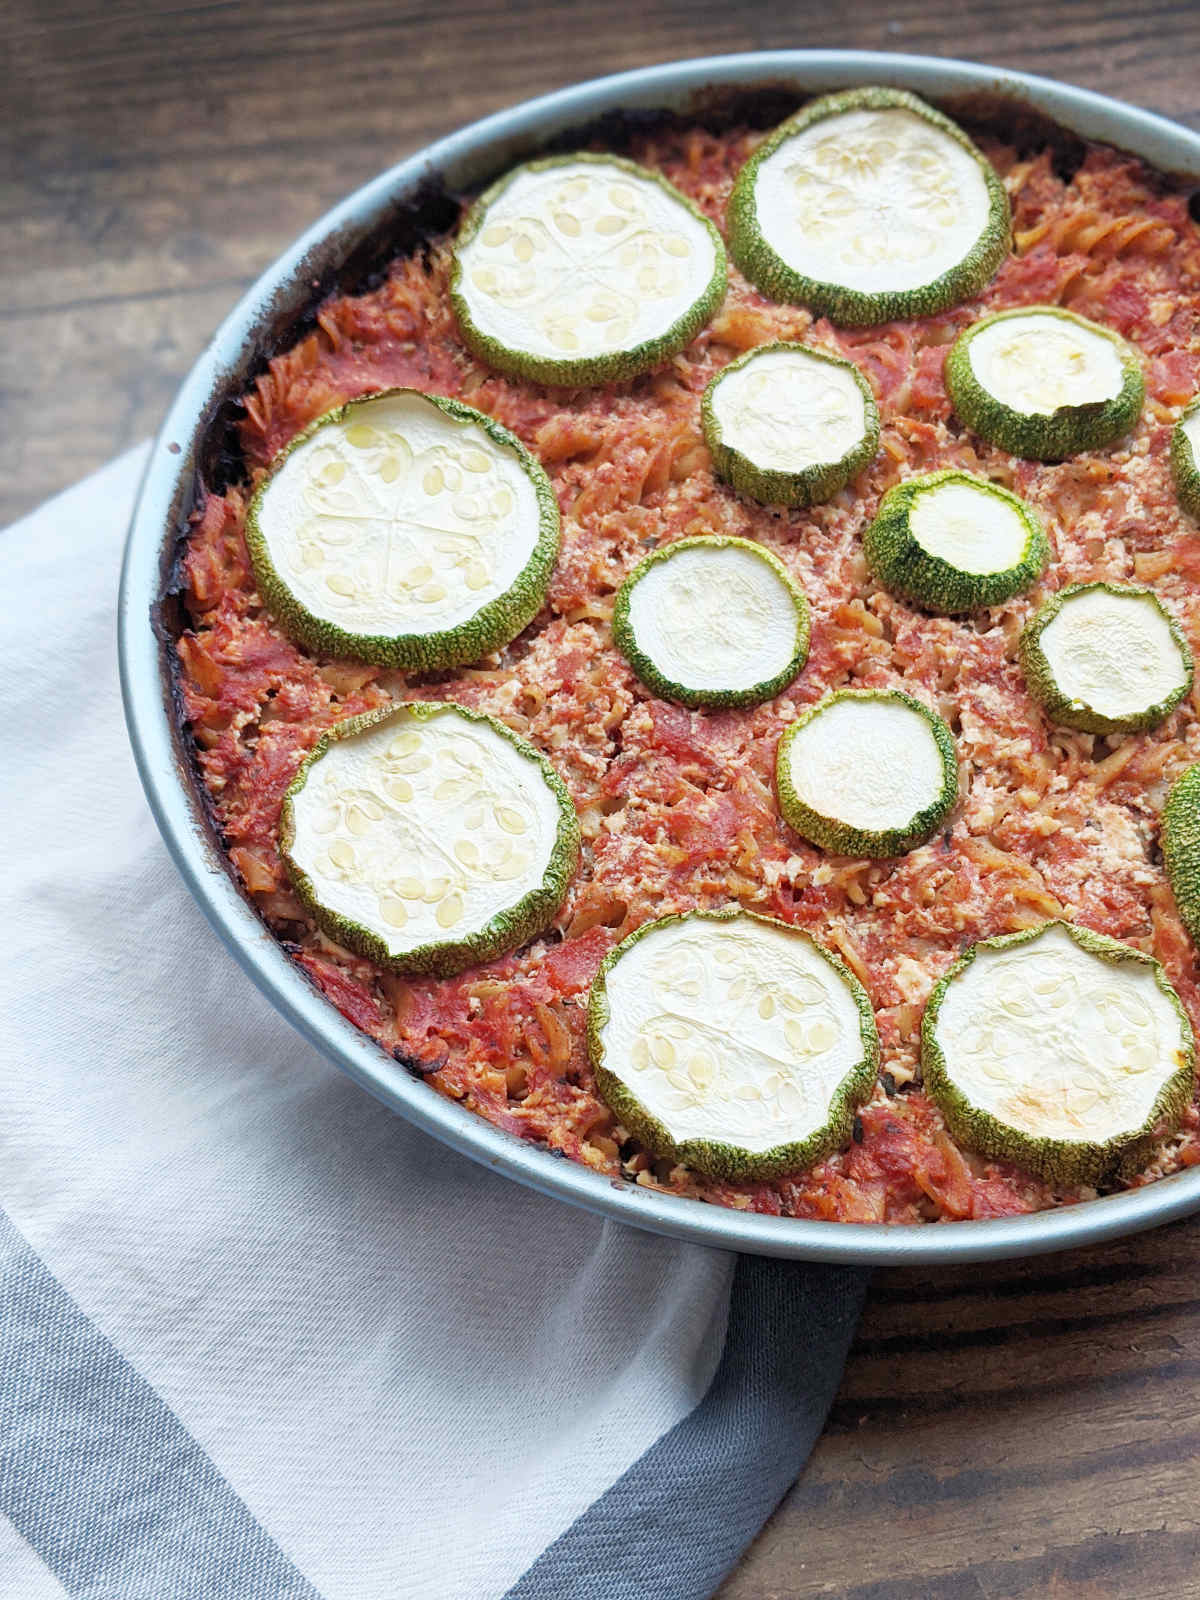 Pasta casserole topped with zucchini slices.